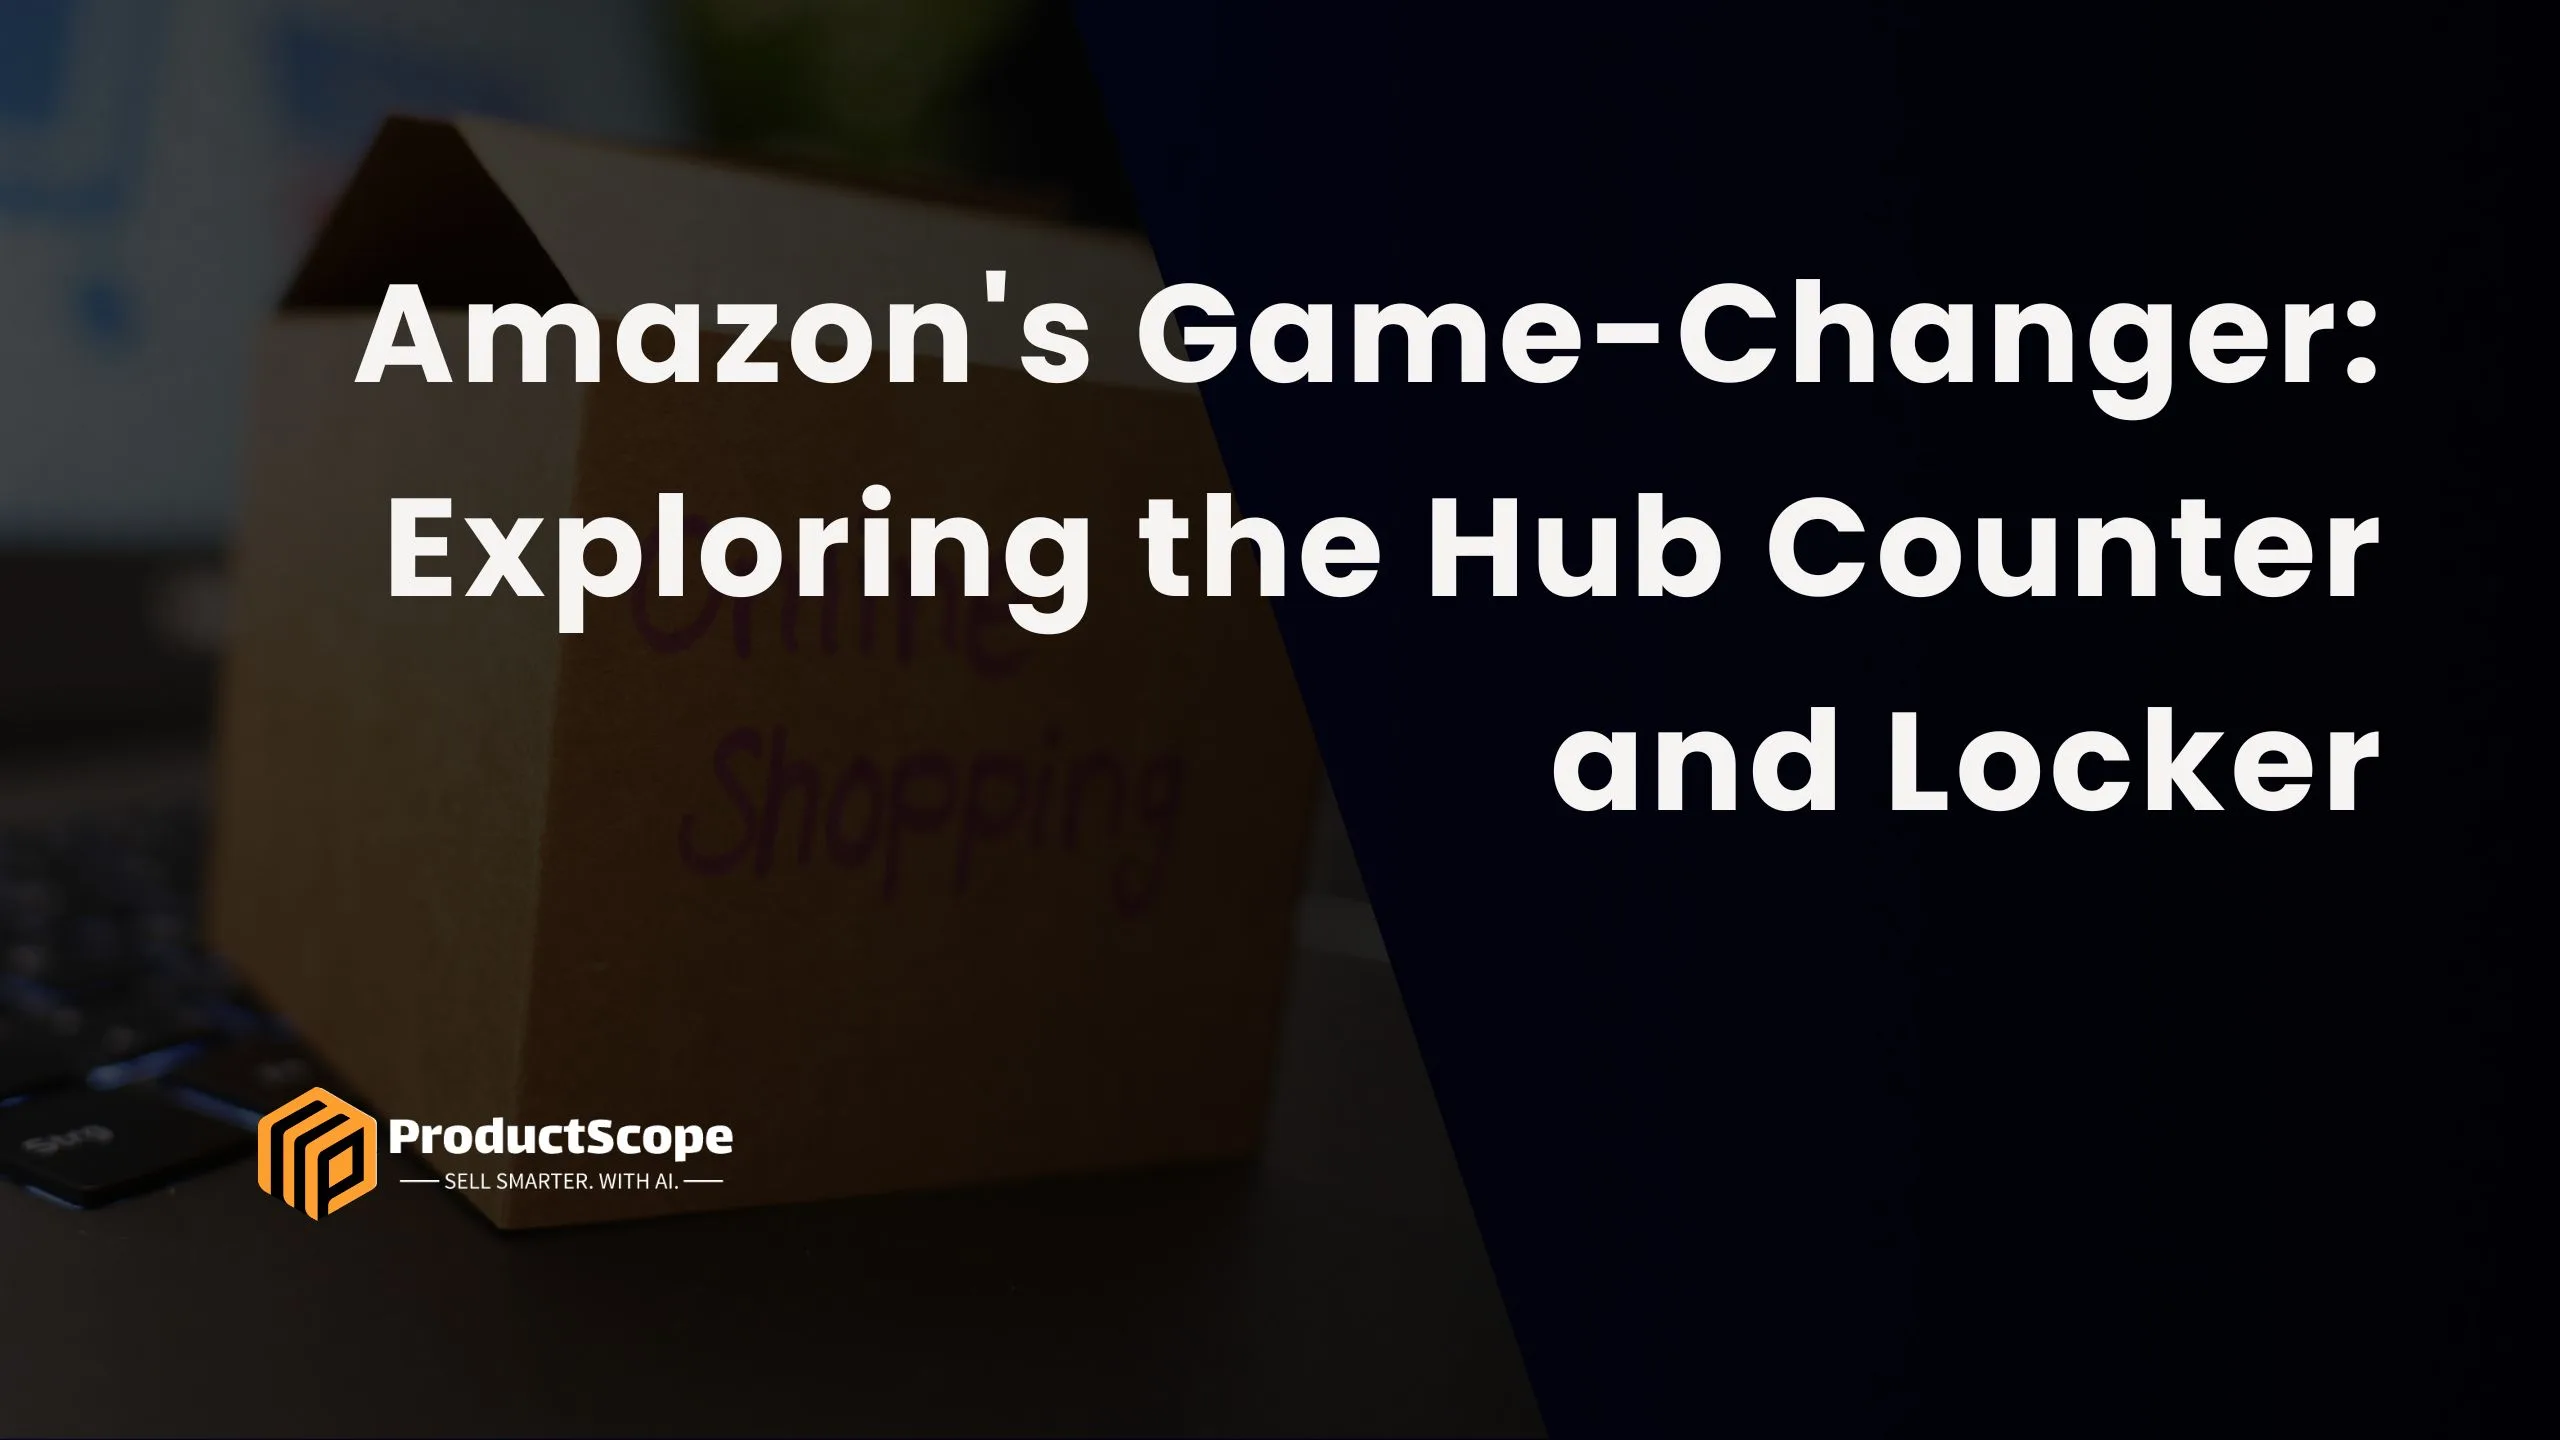 Amazon's Game-Changer: Exploring the Hub Counter and Locker